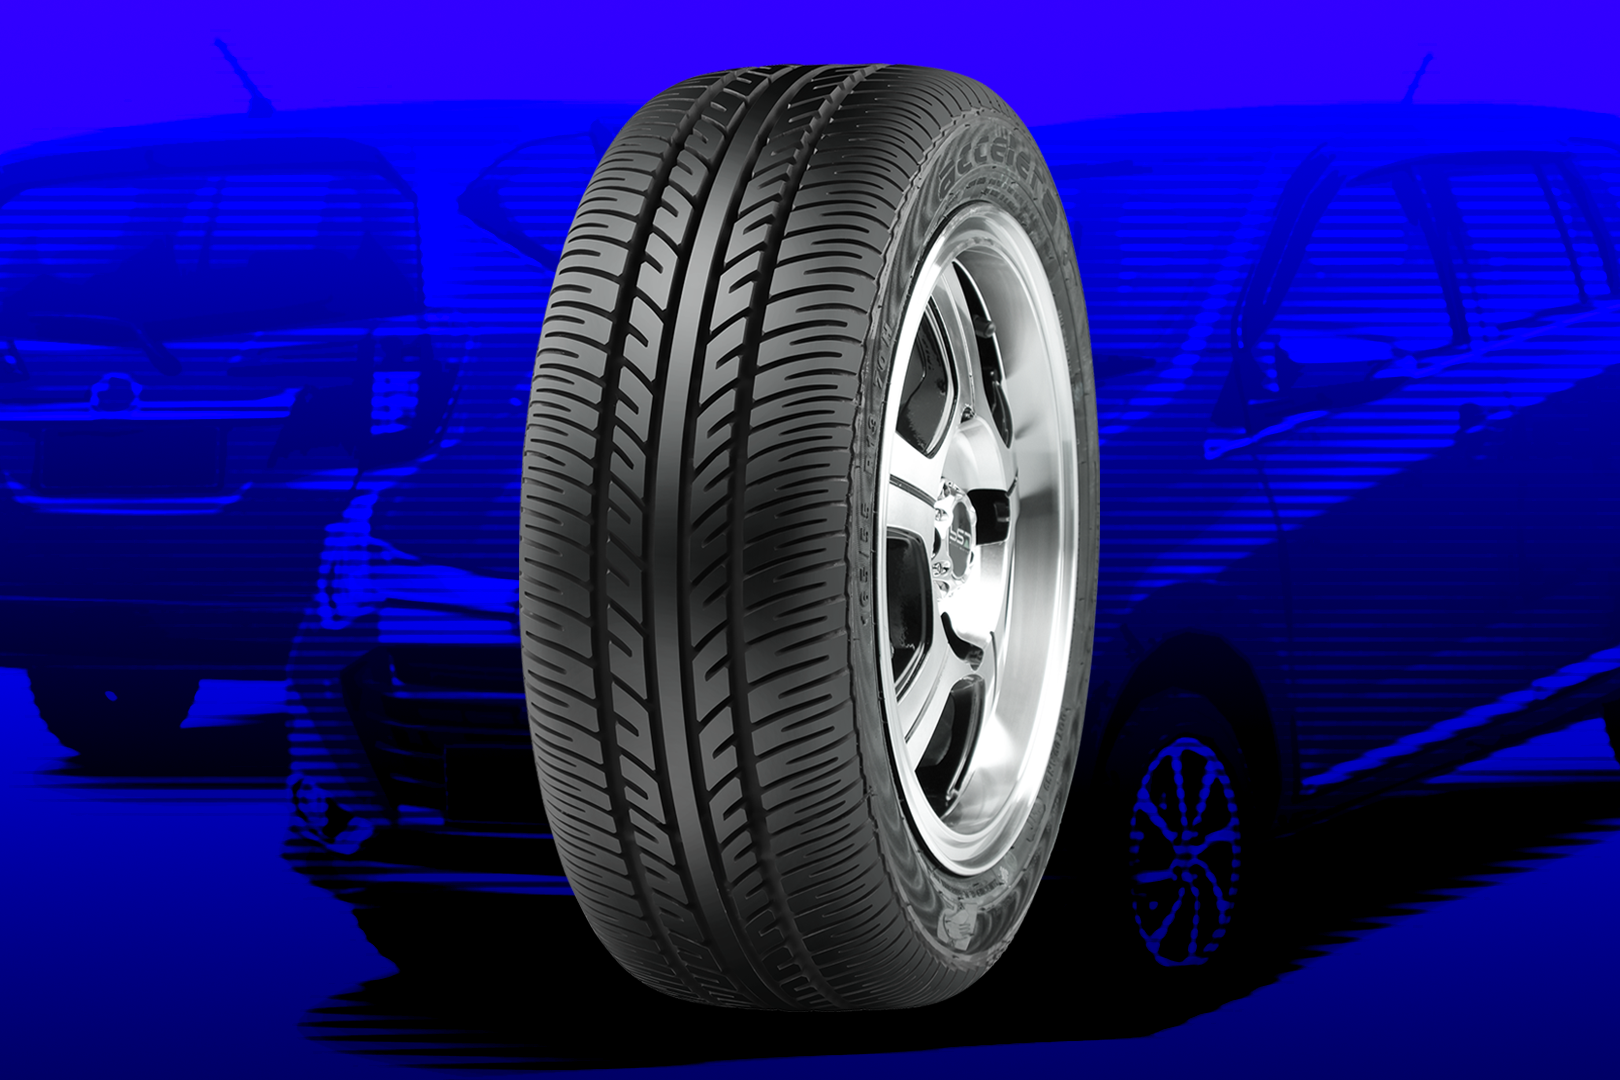 Accelera gamma, the Tyre For Small Size MPVs